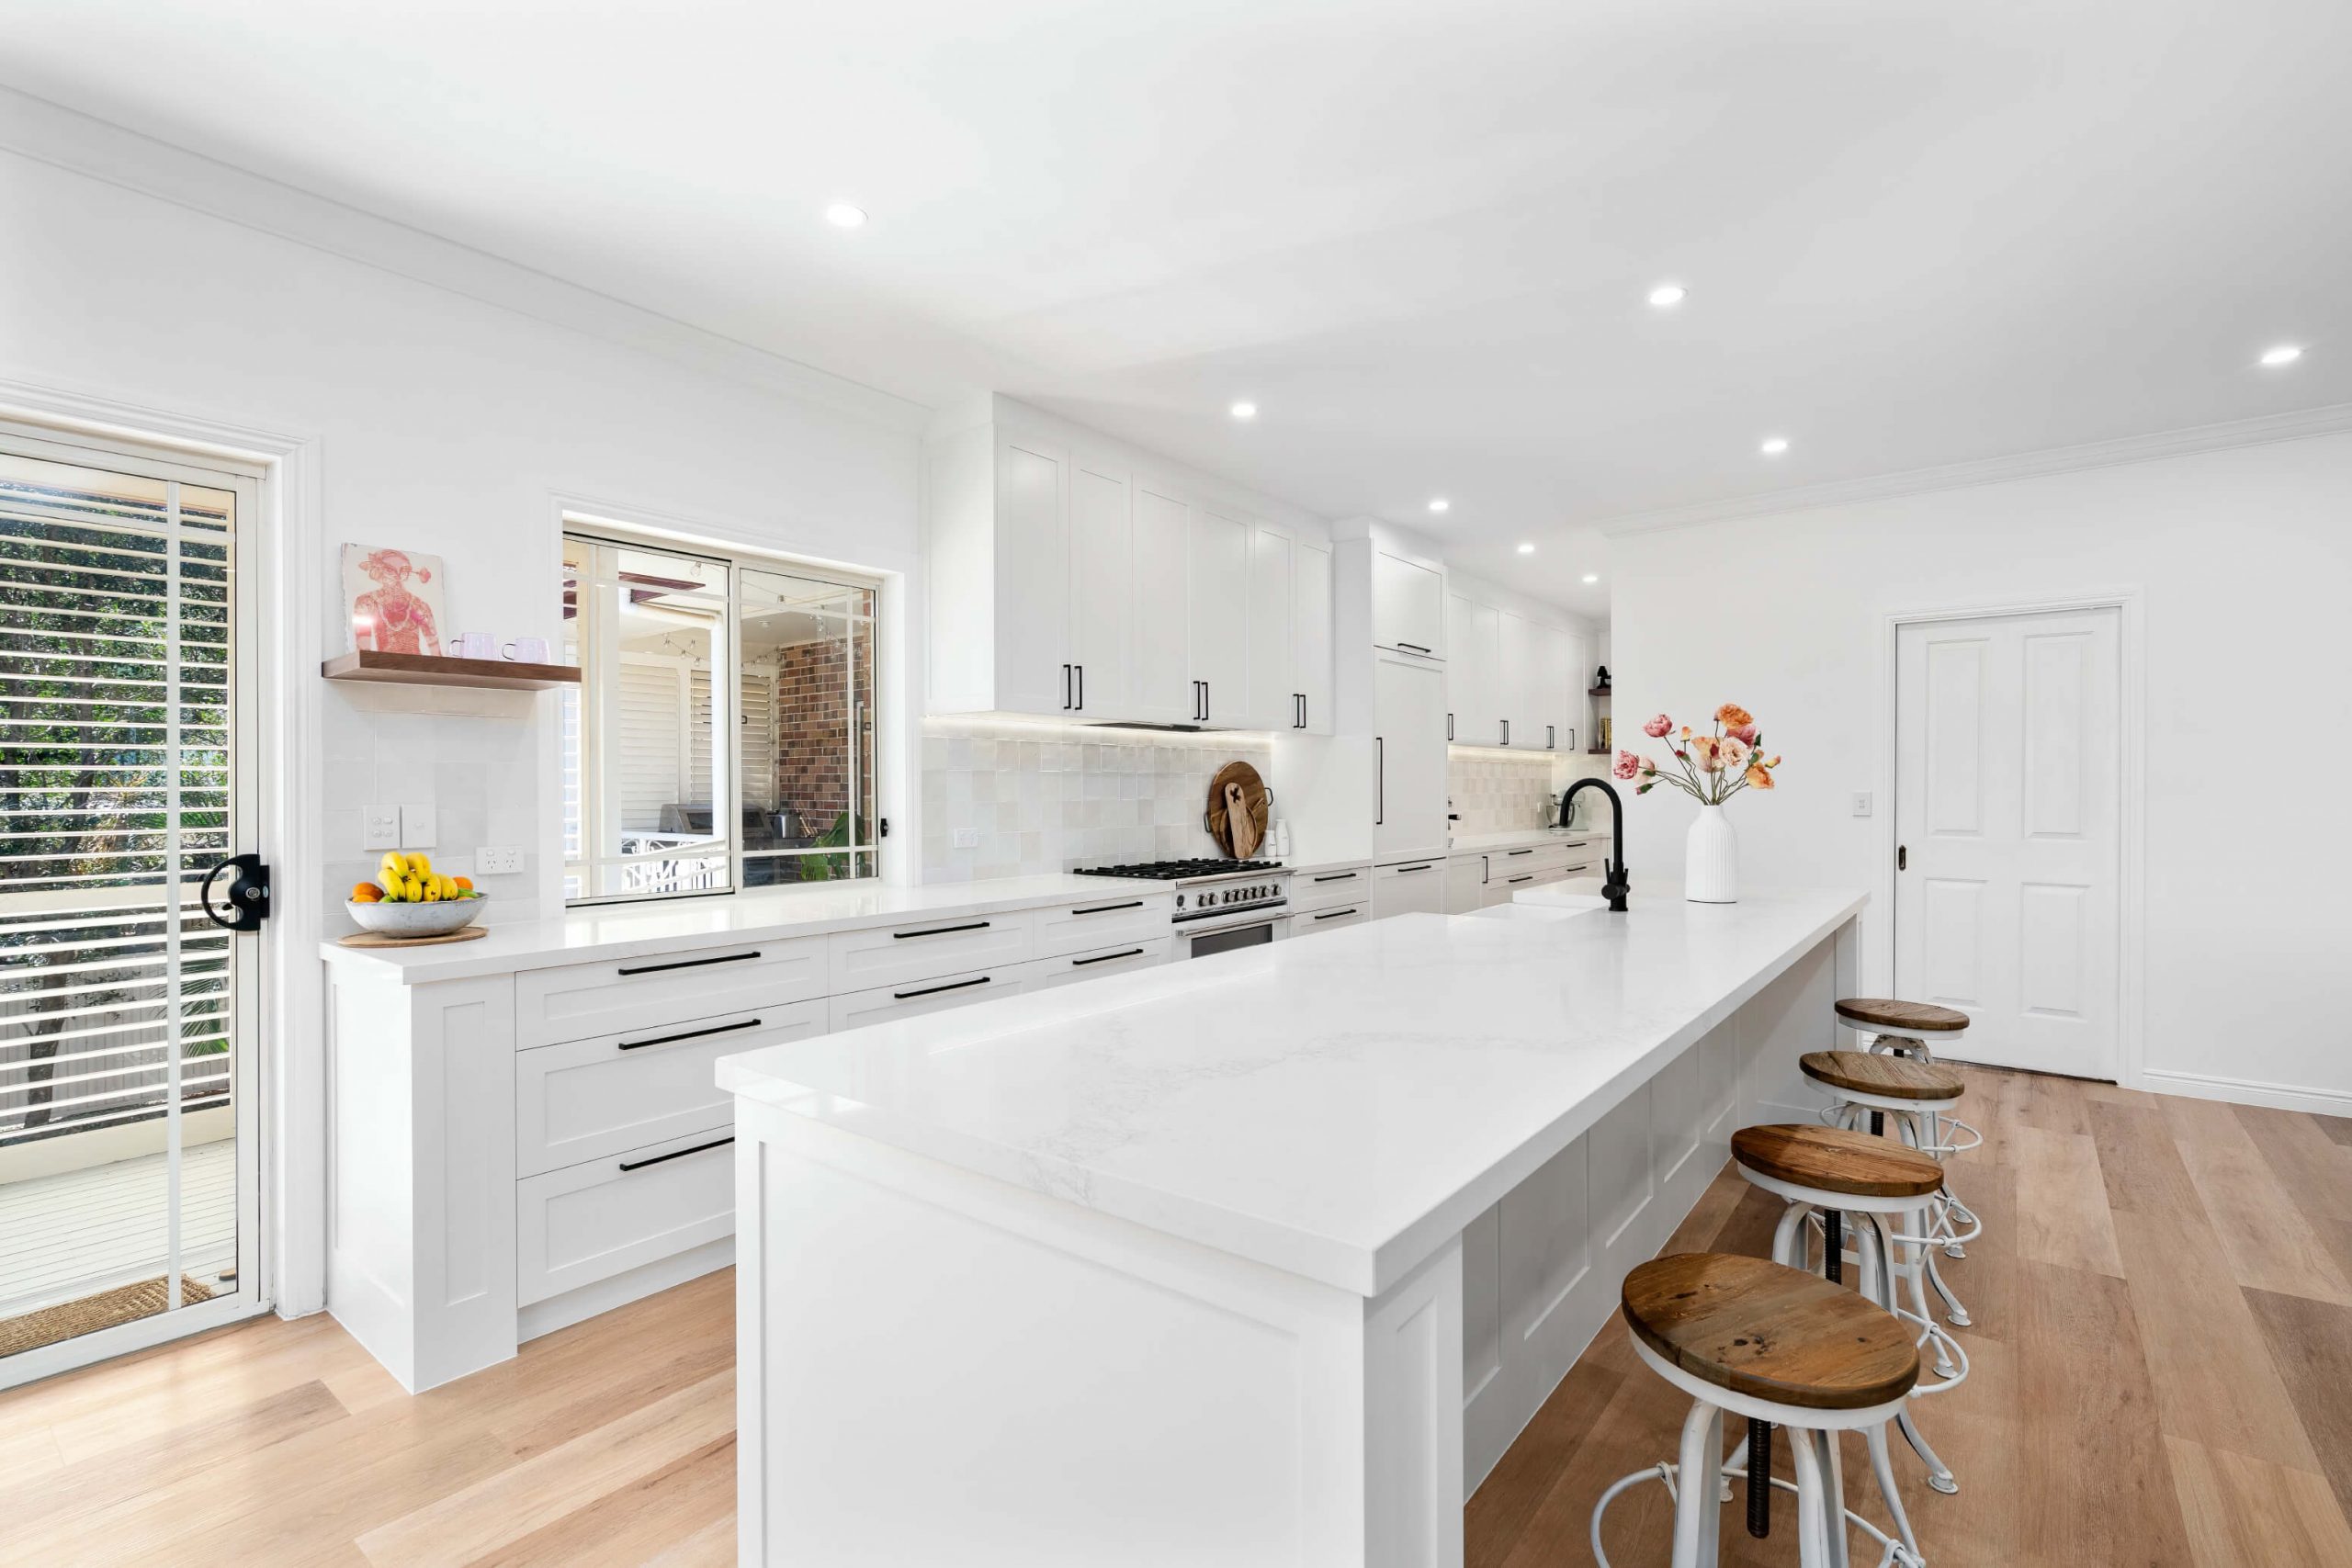 robina kitchen renovation with minimal stress during the renovation thanks to BJF joinery